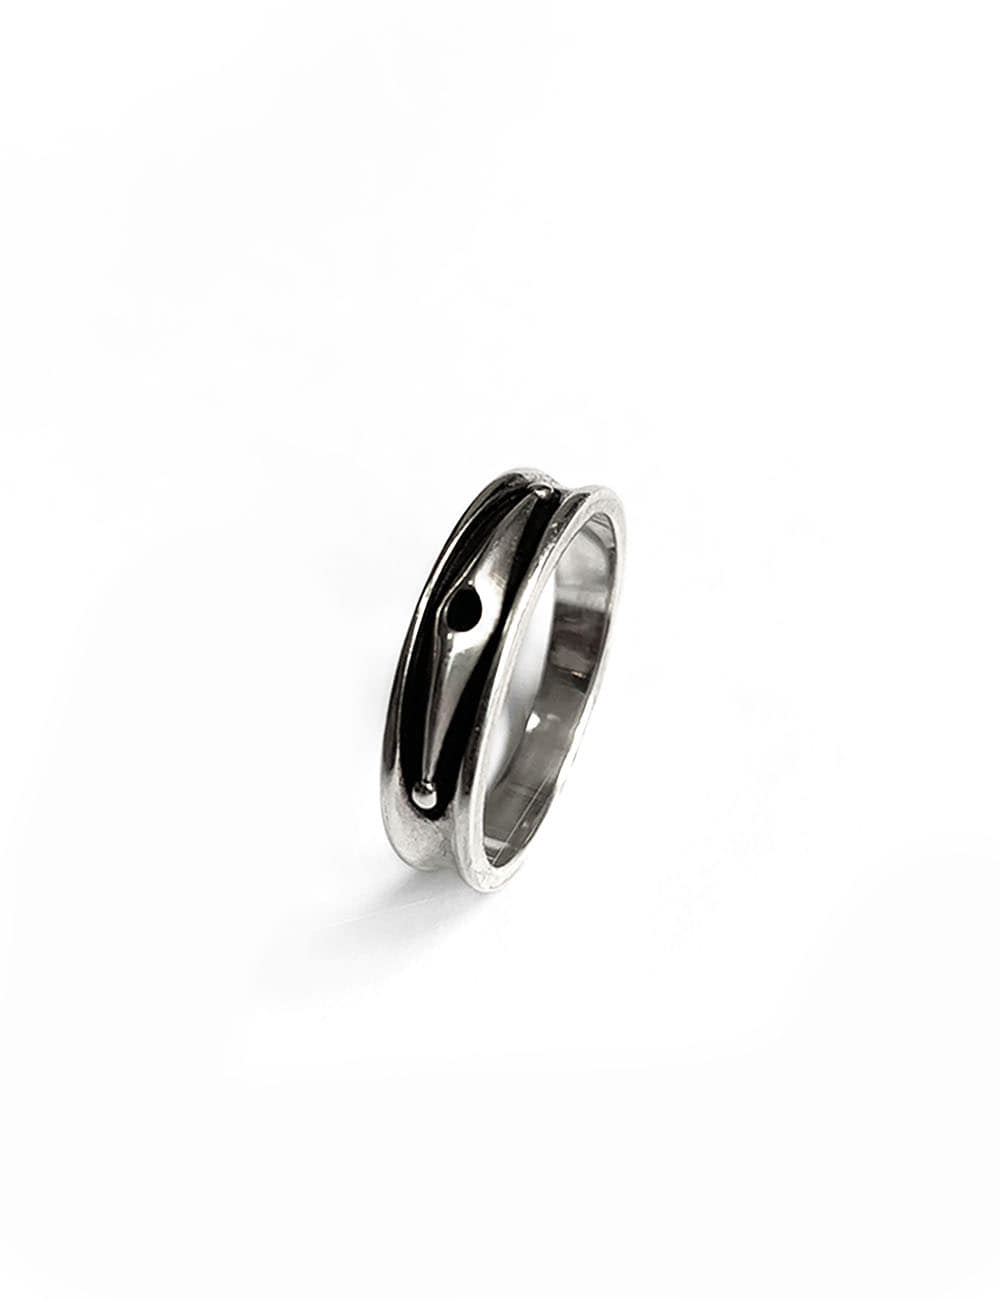 COMPASS RING